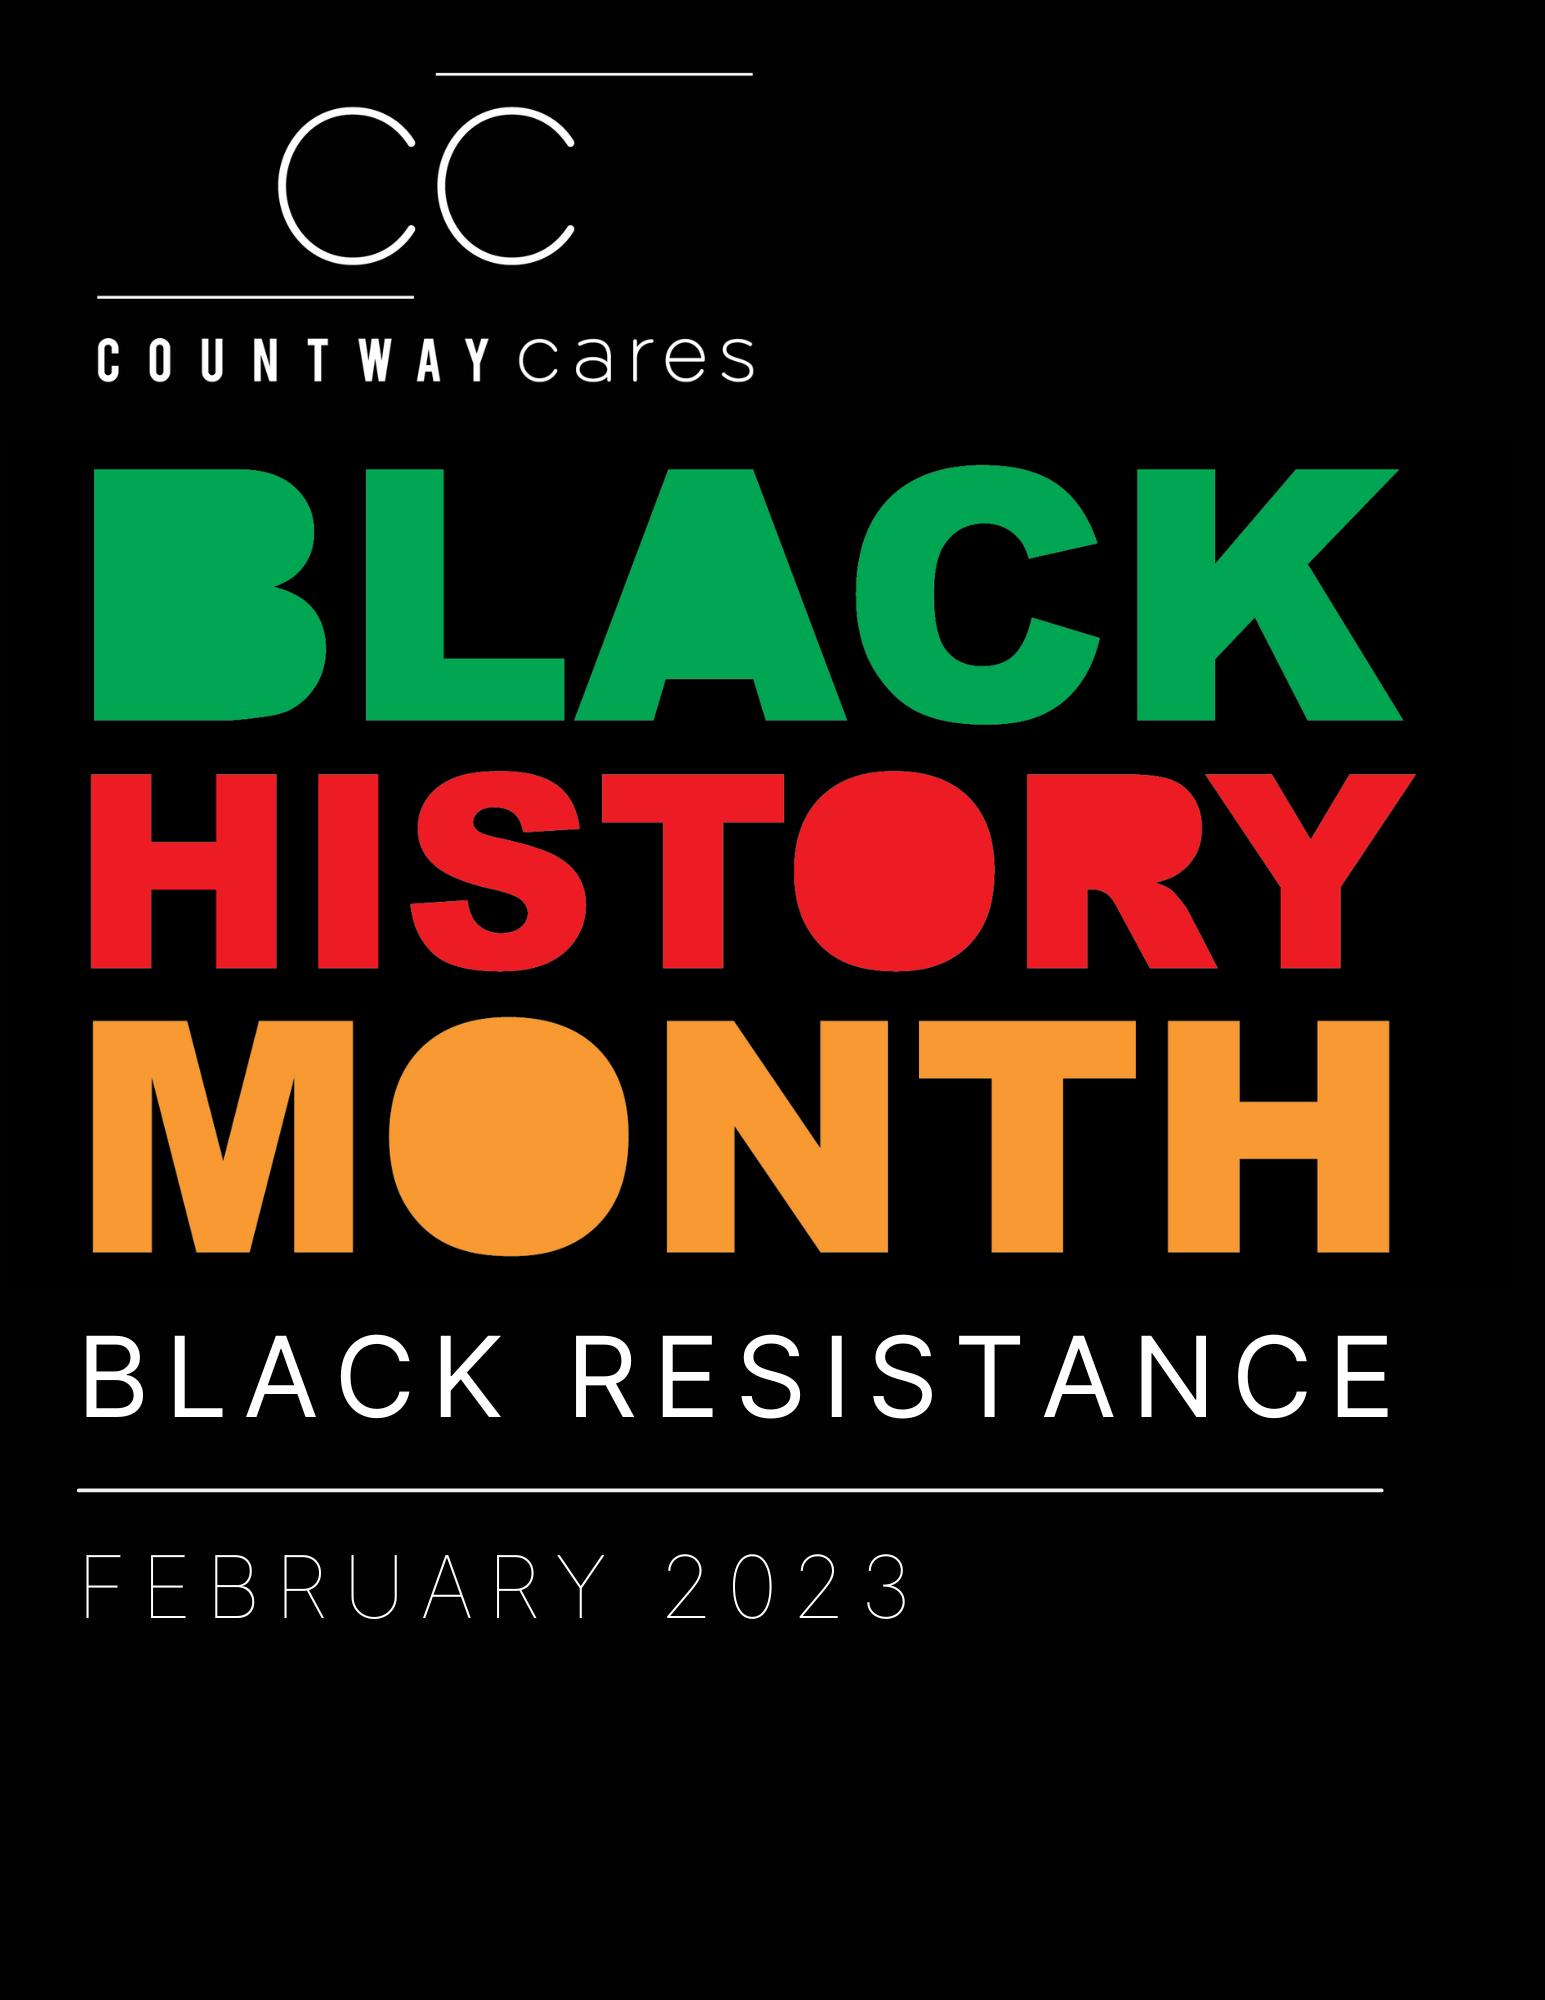 Countway Cares about Black History Month. Black Resistance. February 2023